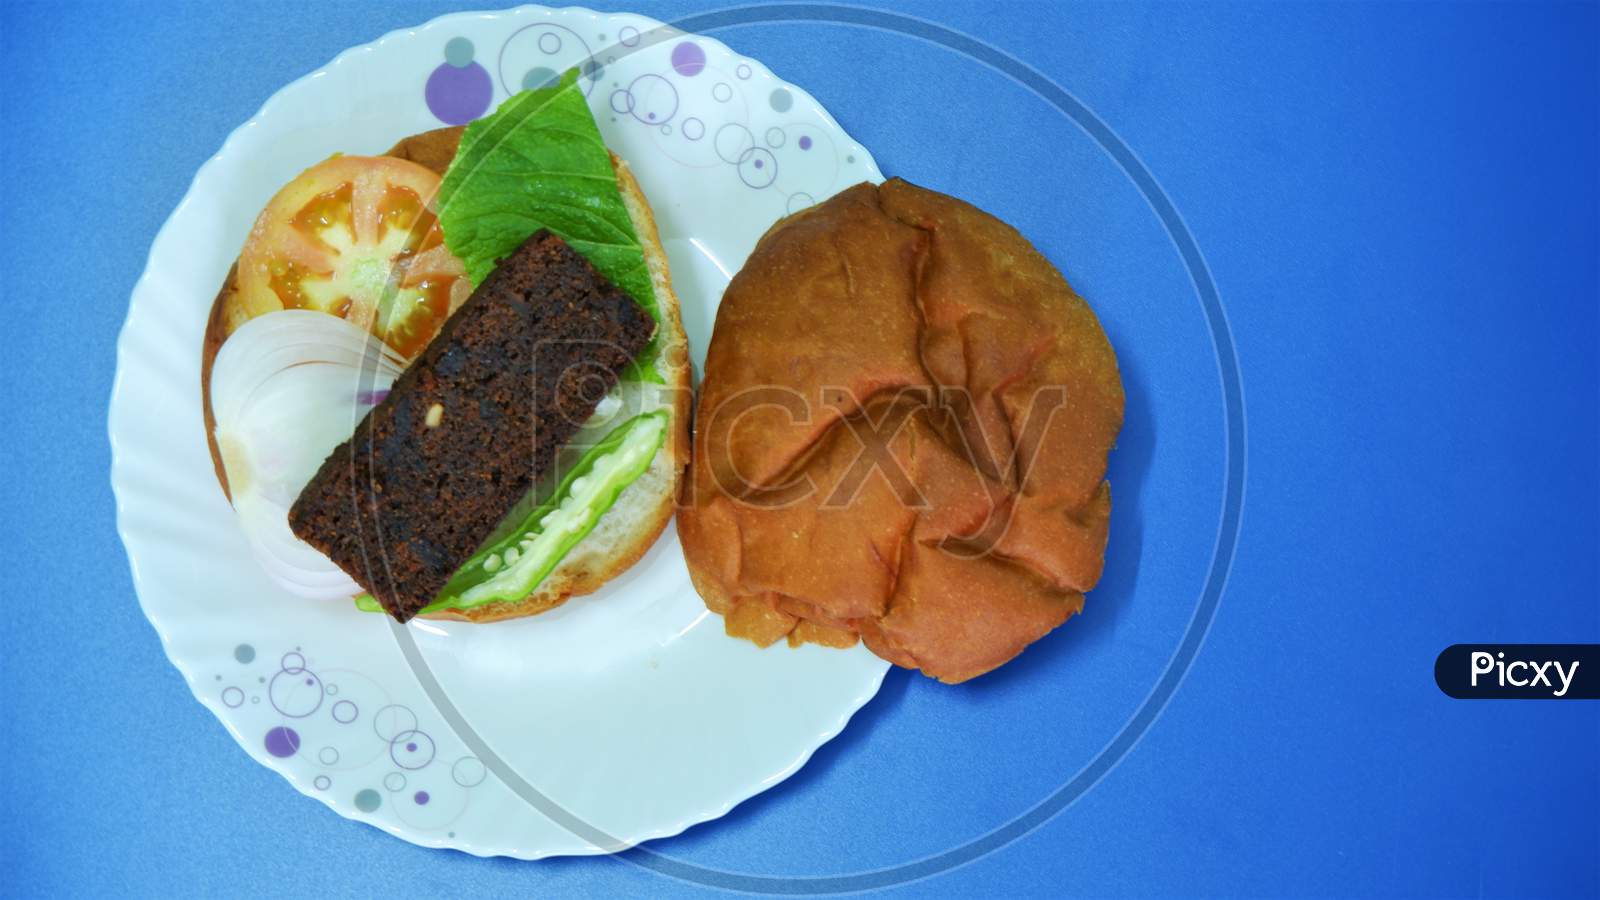 stuffed big burger on white plate and blue background